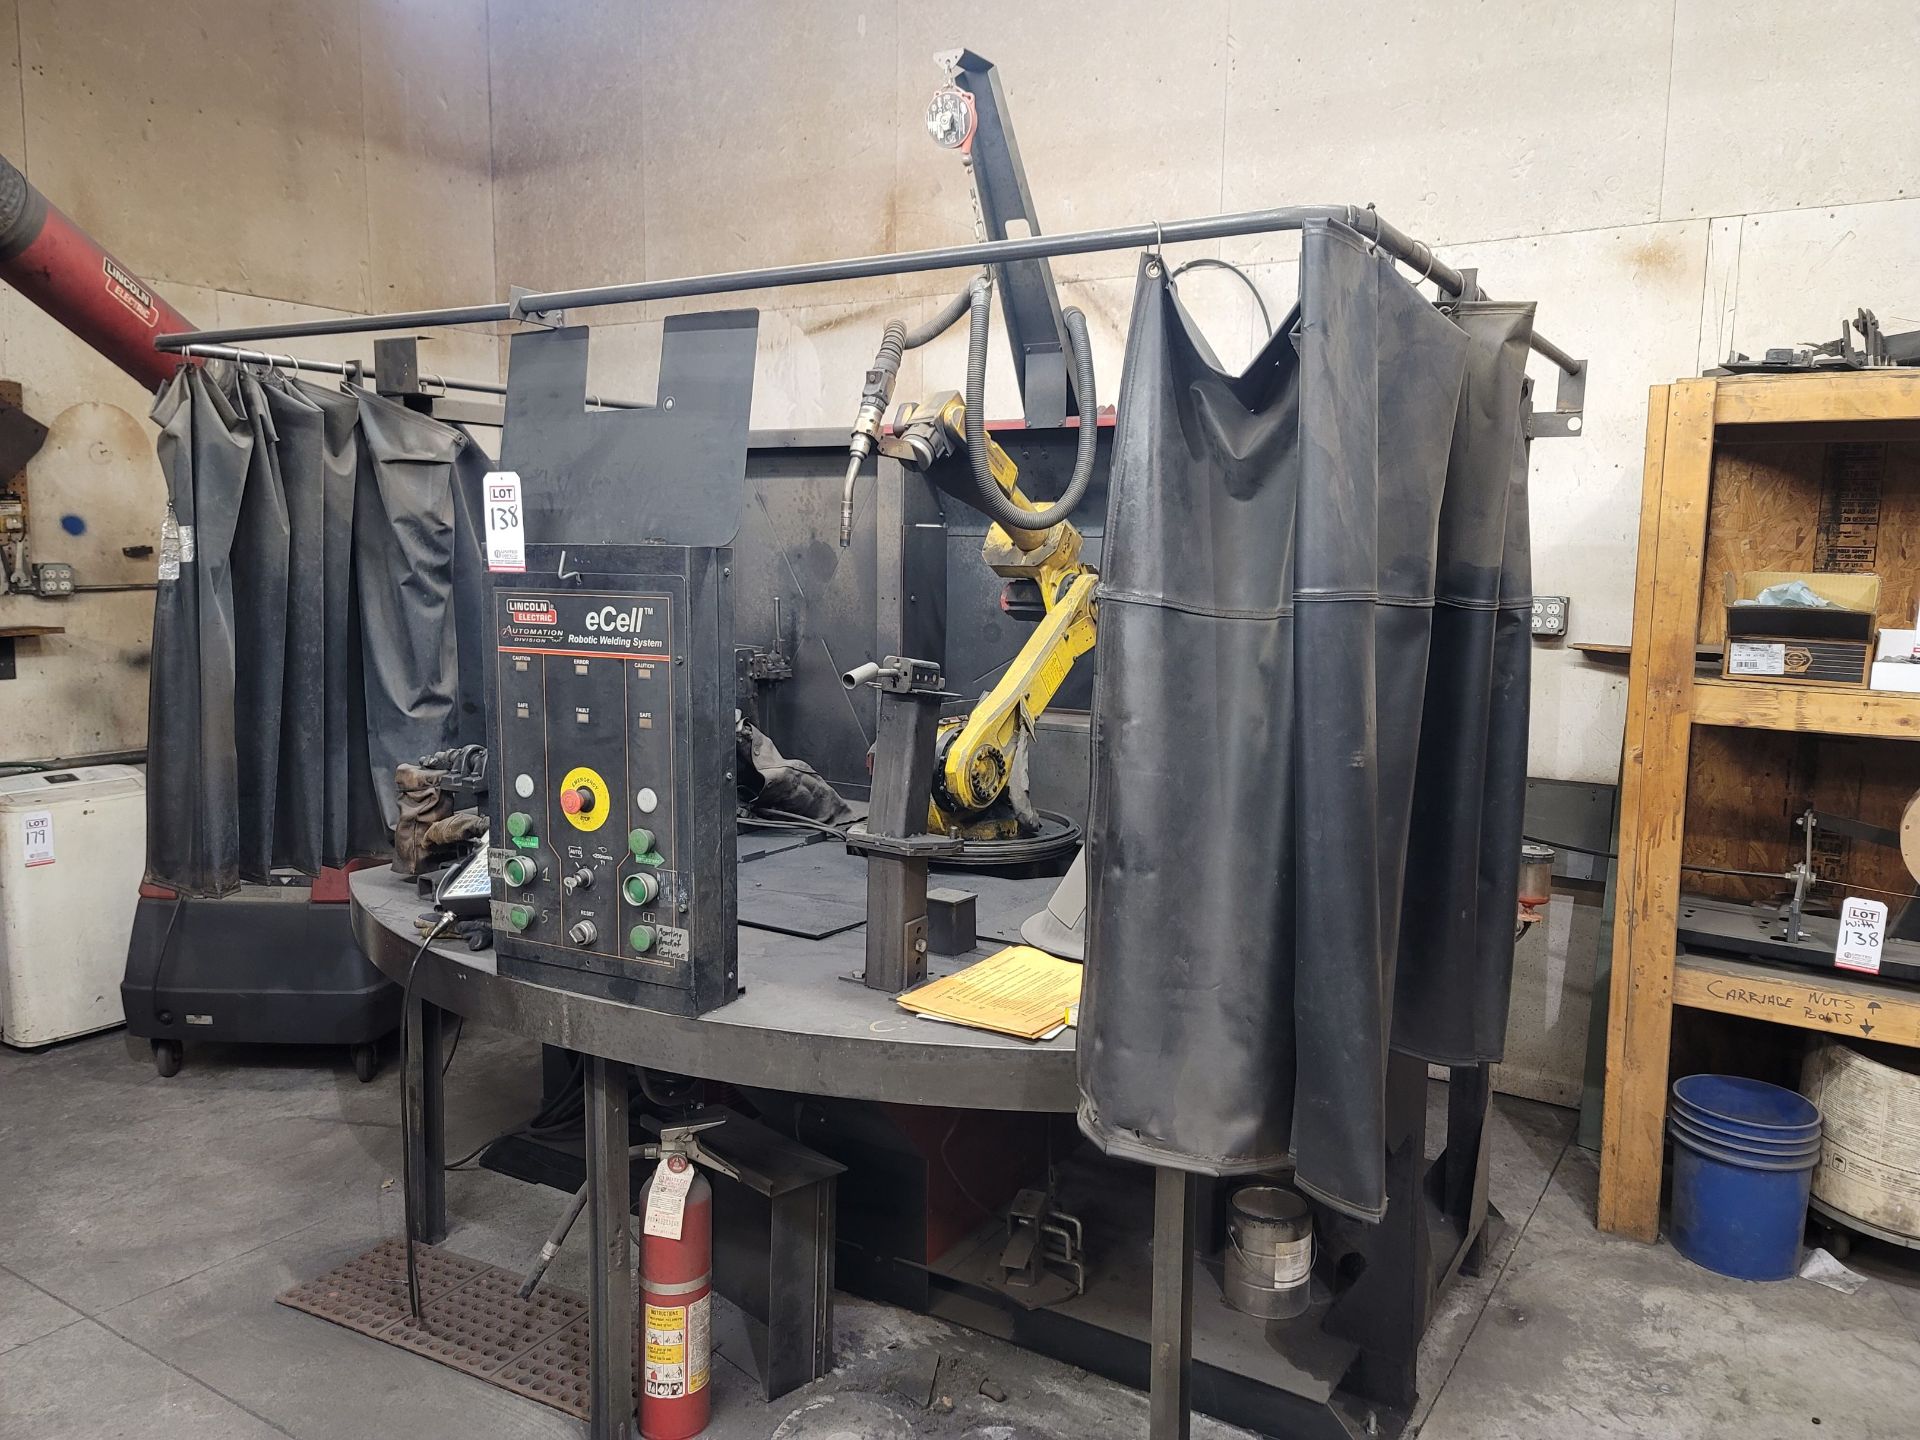 2004 LINCOLN ELECTRIC E-CELL ROBOTIC WELDING SYSTEM, FANUC 6-AXIS ROBOT 100IBE W/ RJ3IB